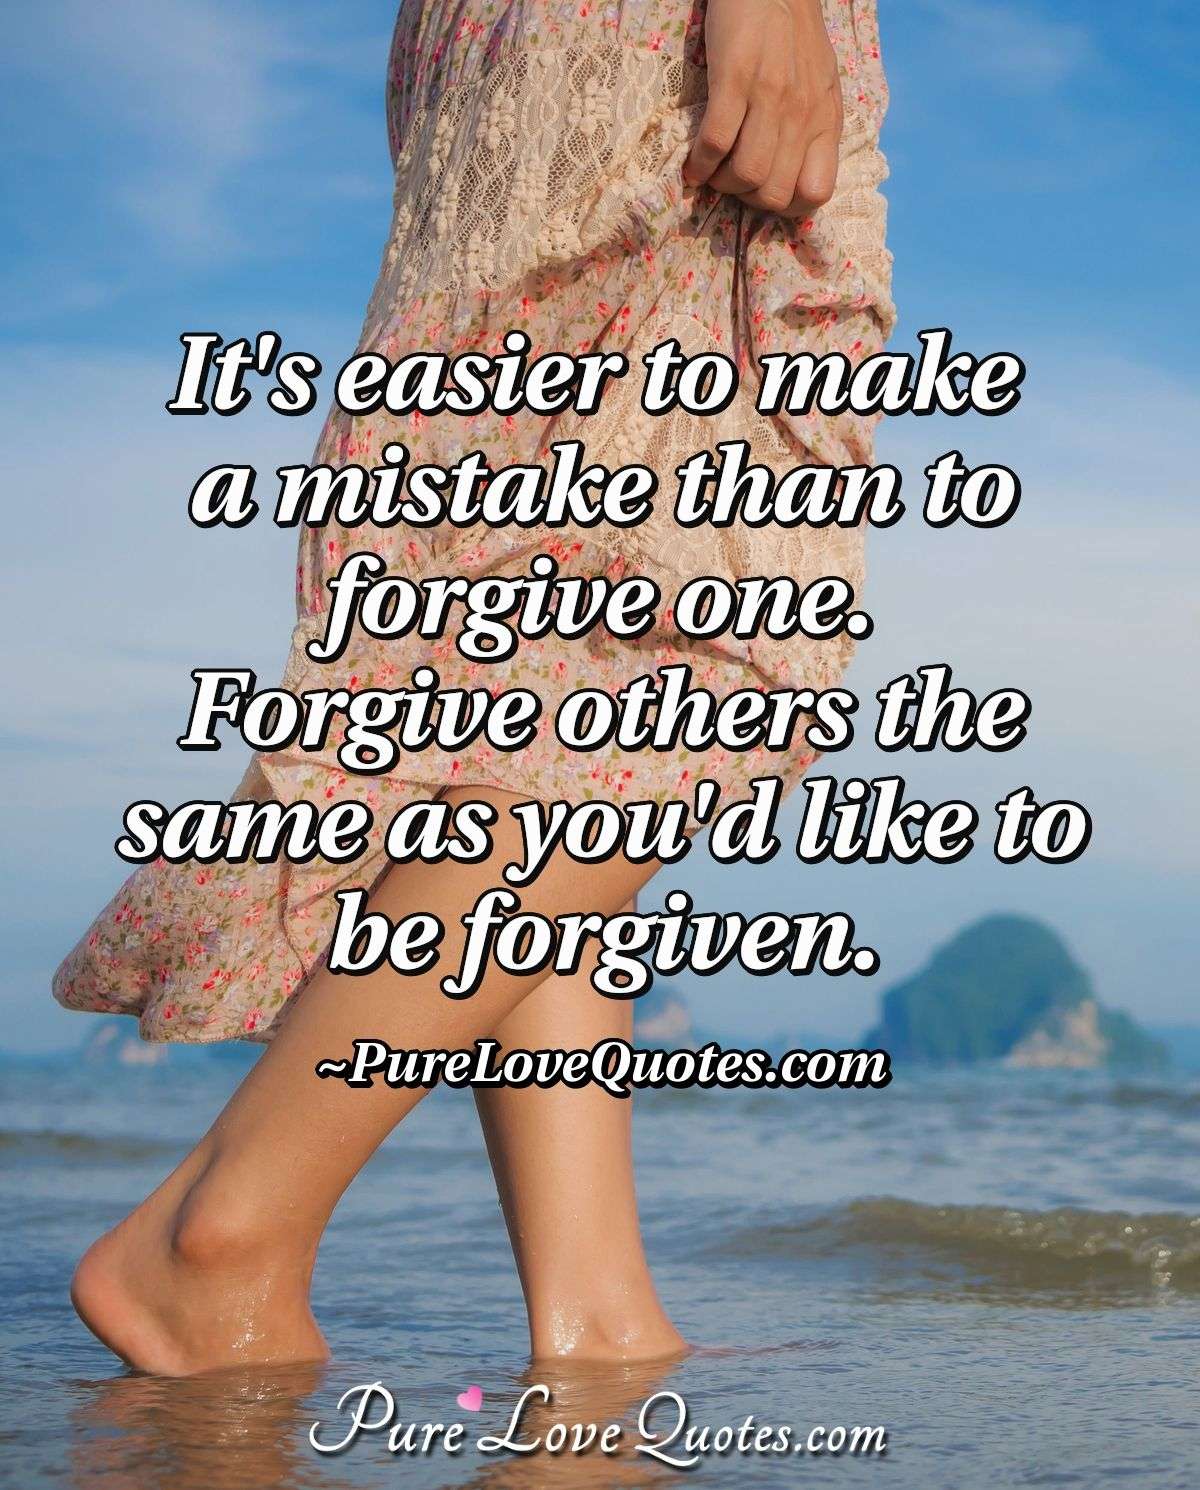 It's easier to make a mistake than to forgive one.  Forgive others the same as you'd like to be forgiven. - PureLoveQuotes.com